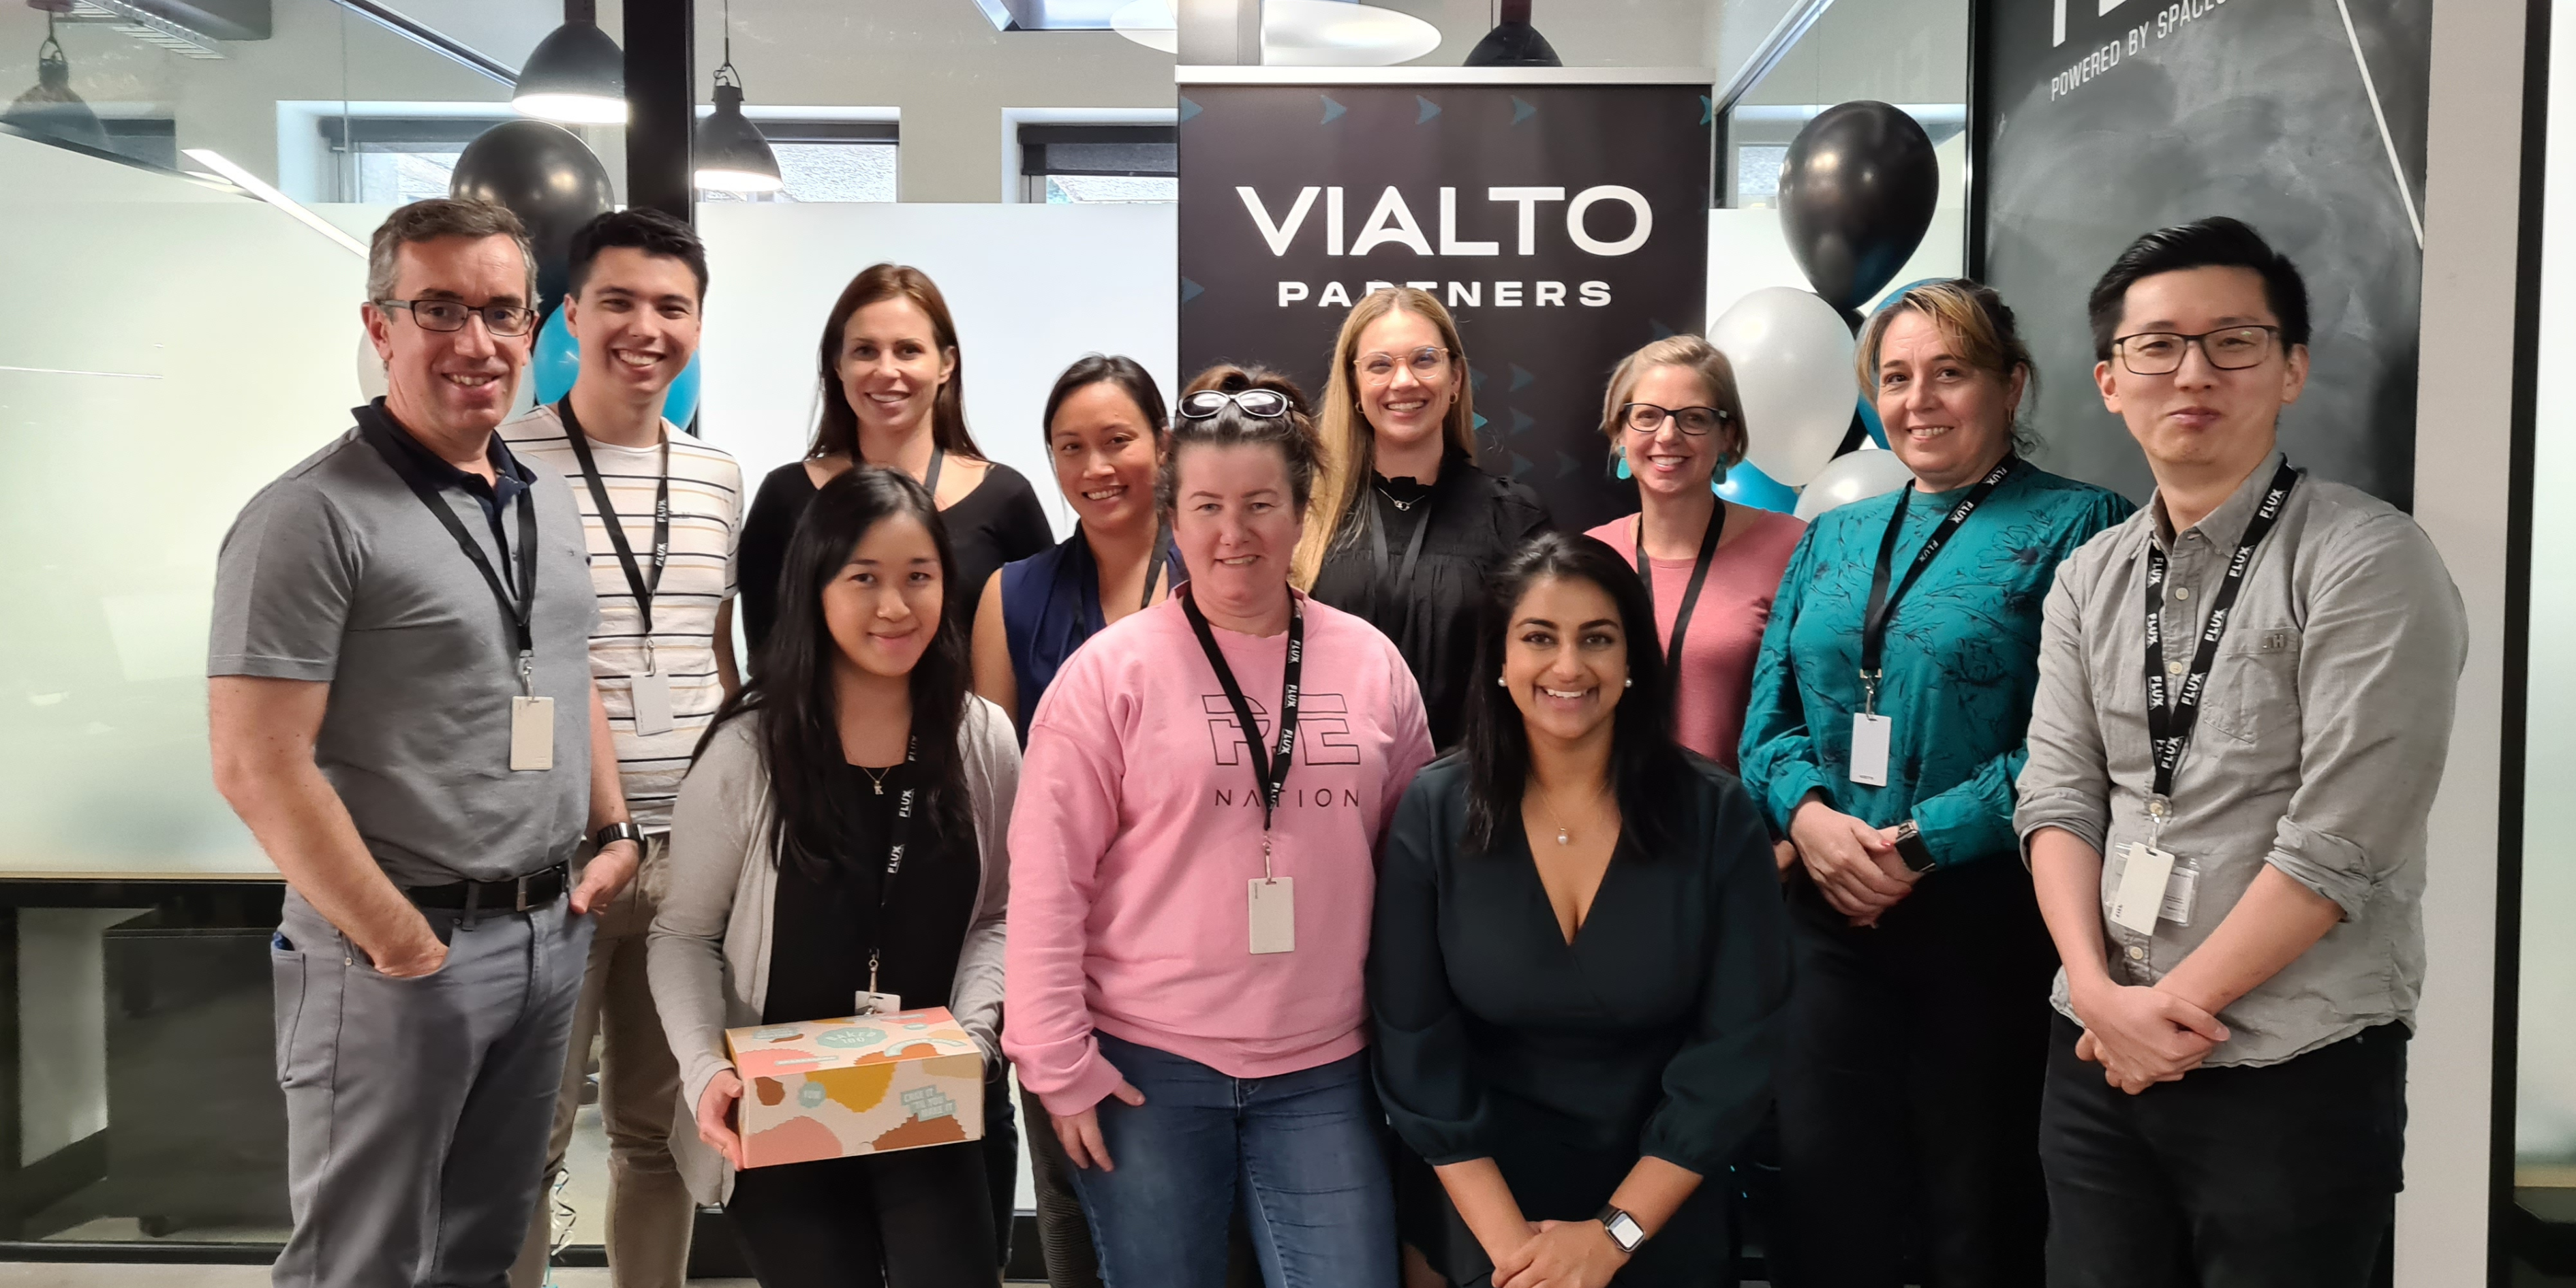 Get to know Spacecubed members, Vialto Partners, who are offering guidance for a global workforce